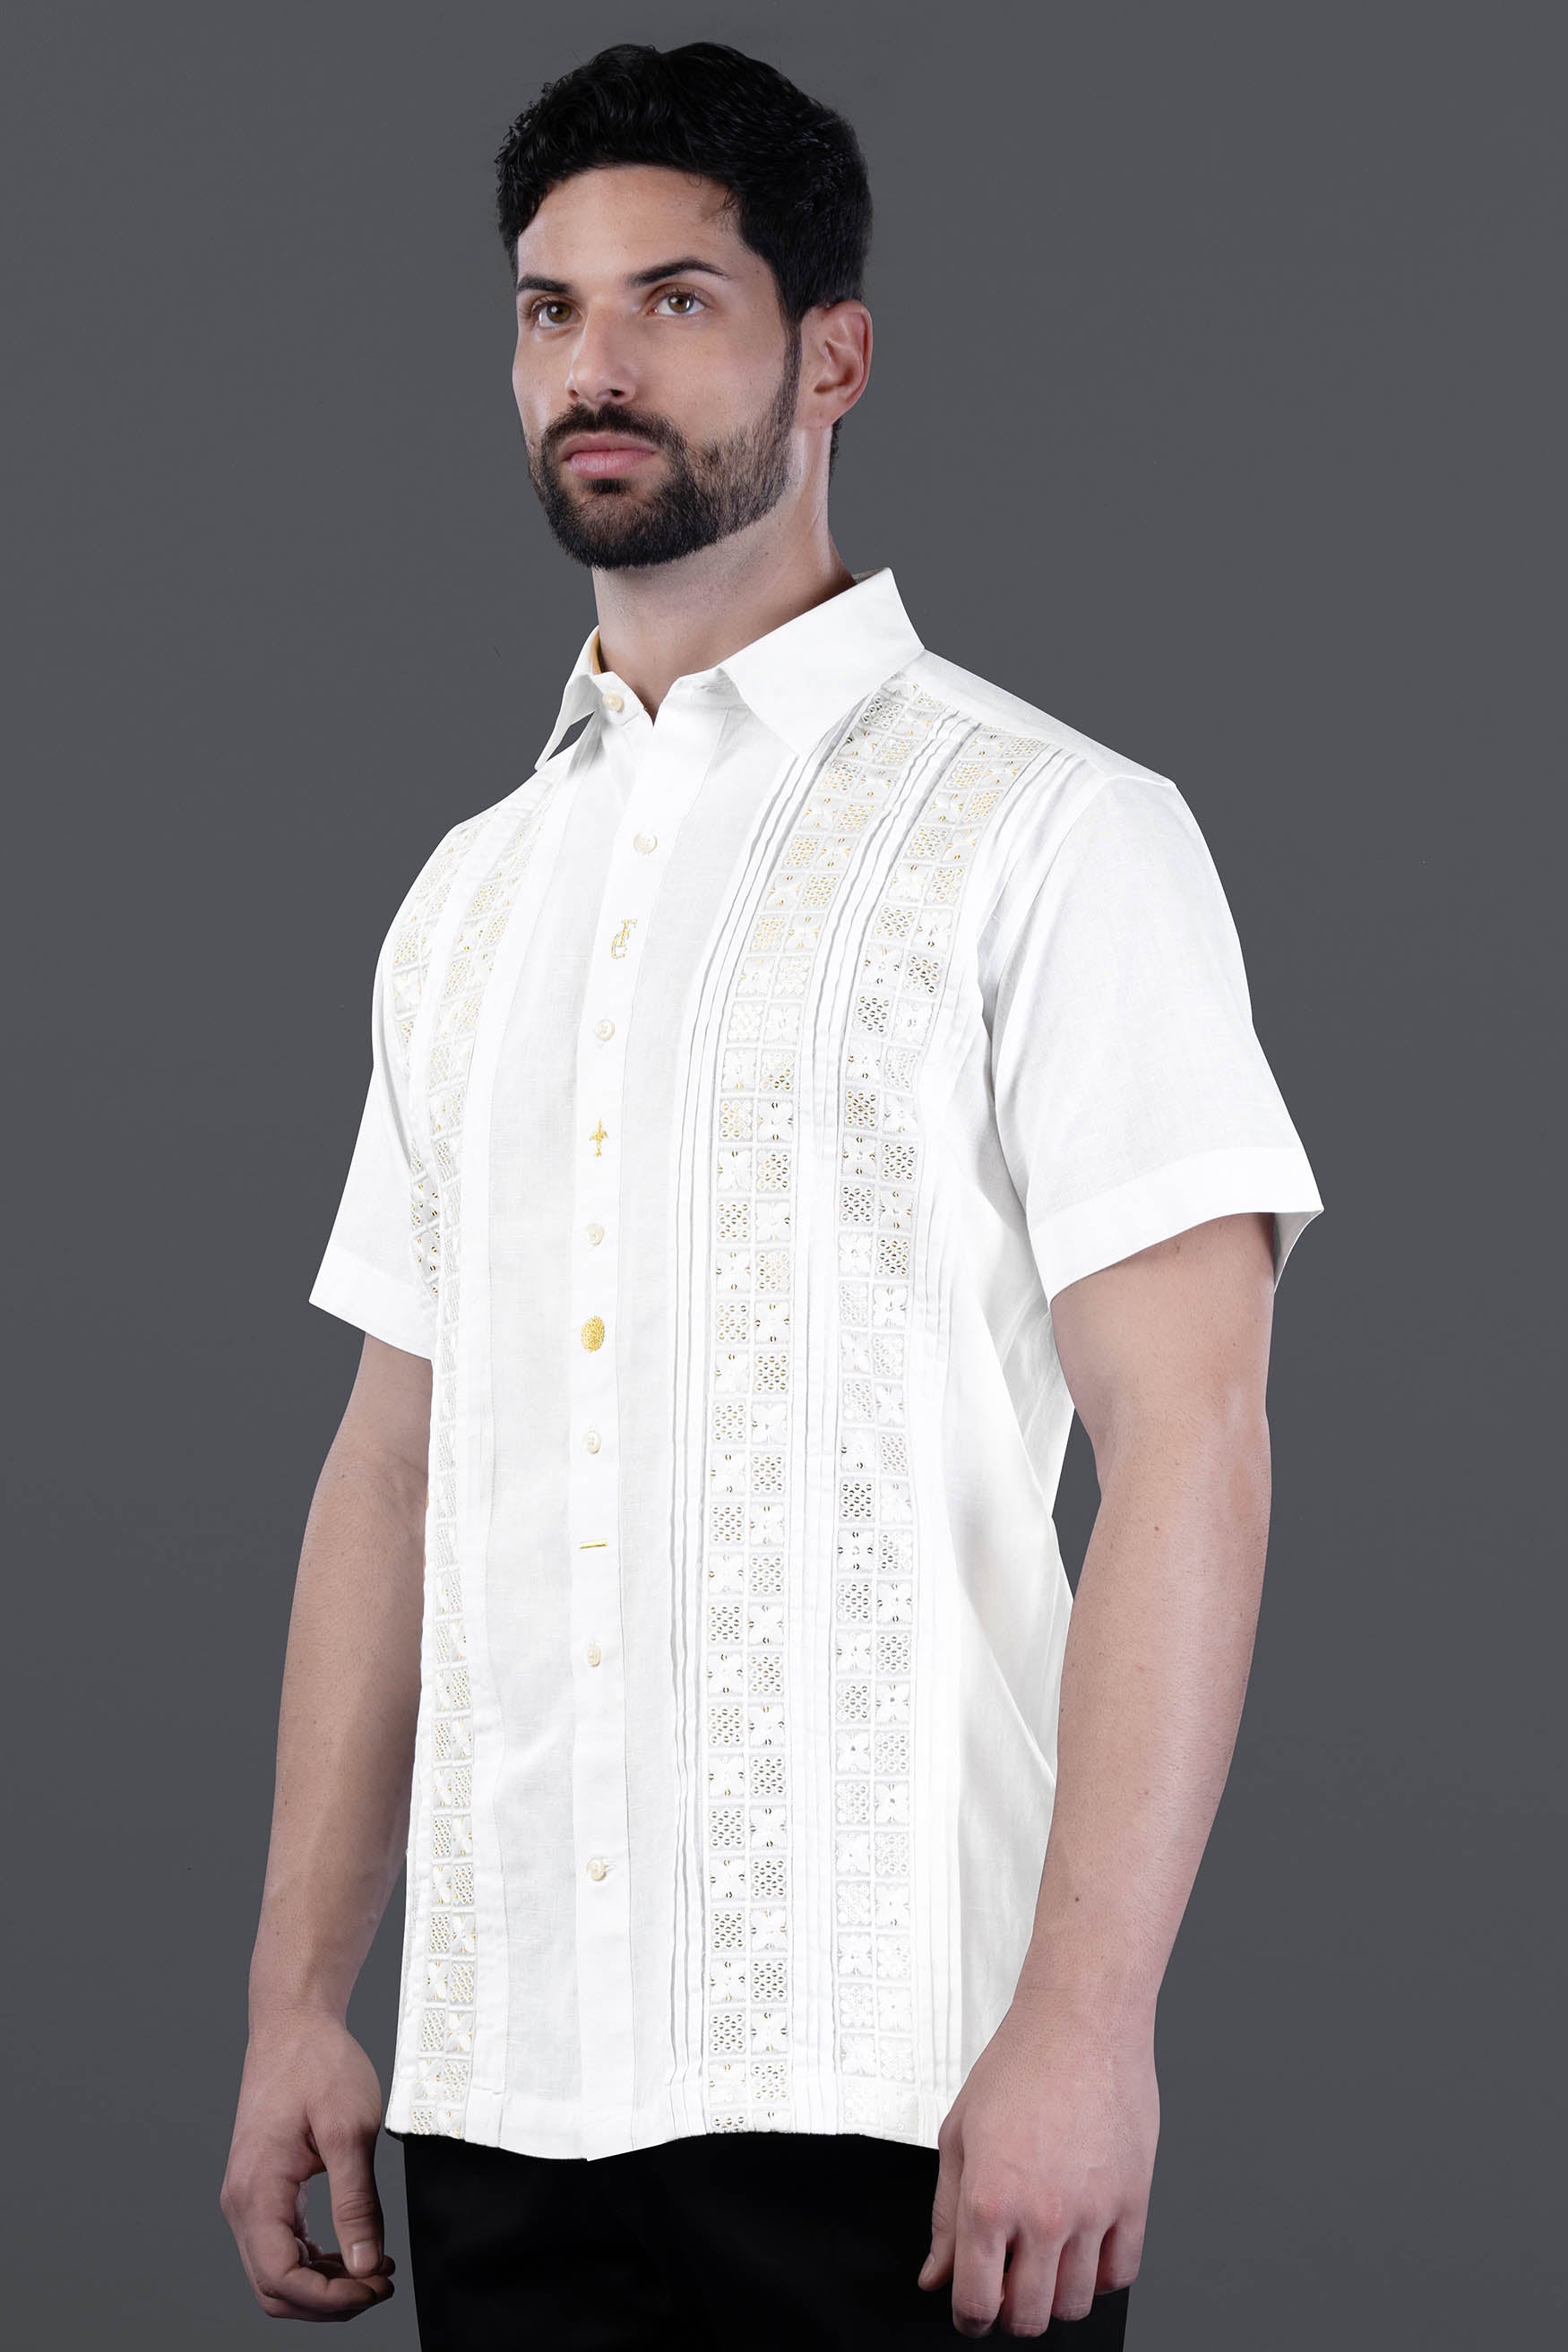 Bright White with Tikki Work and Brand Element Embroidered Luxurious Linen Half Sleeved Designer Shirt 12109-SS-P819-E362-38, 12109-SS-P819-E362-39, 12109-SS-P819-E362-40, 12109-SS-P819-E362-42, 12109-SS-P819-E362-44, 12109-SS-P819-E362-46, 12109-SS-P819-E362-48, 12109-SS-P819-E362-50, 12109-SS-P819-E362-52